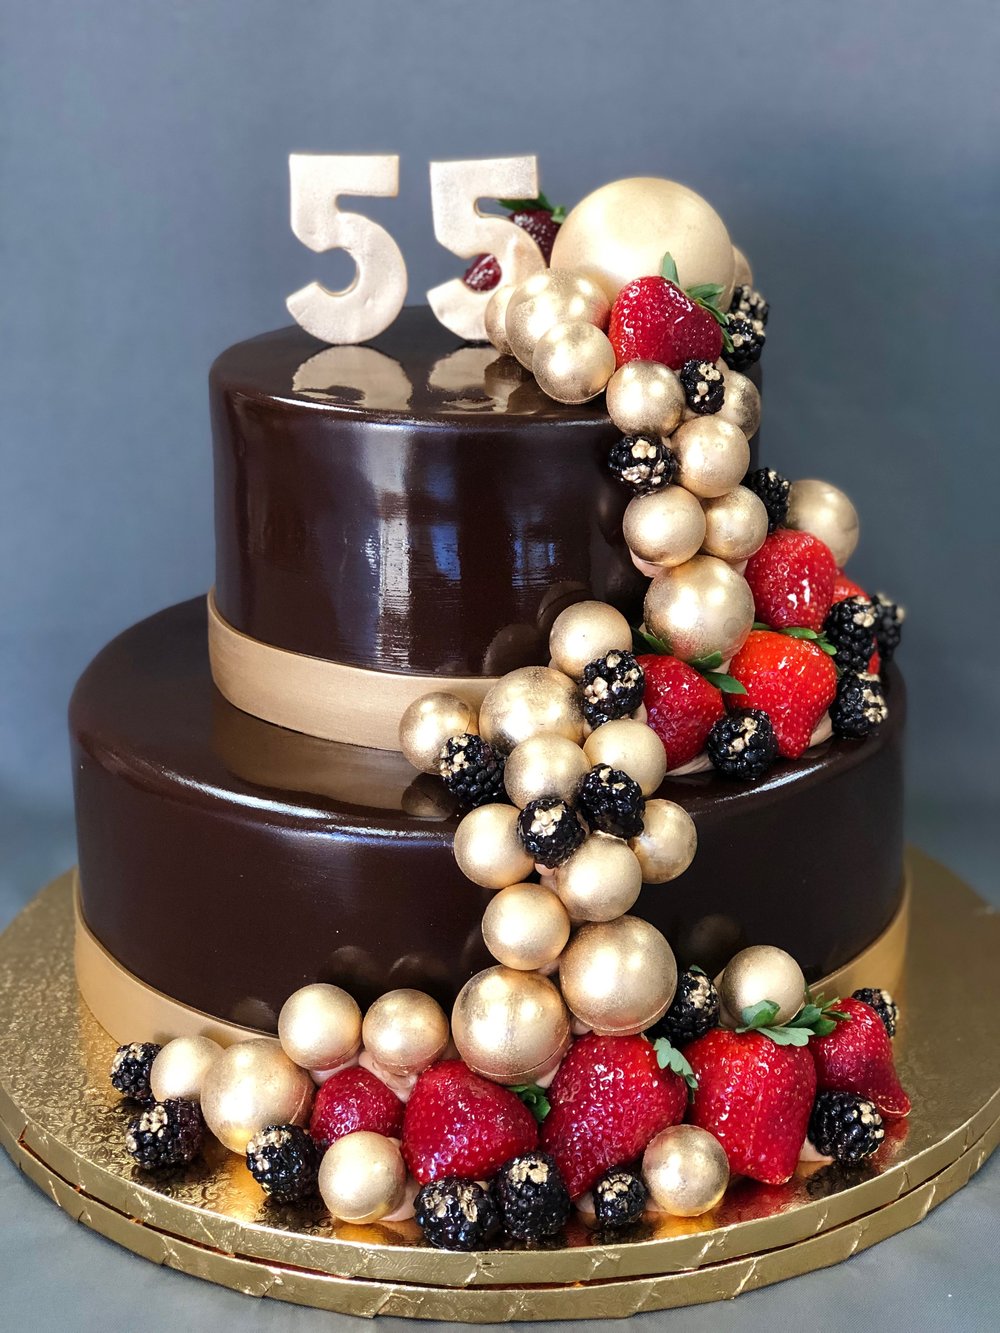 Birthday Cakes for 55 Year Olds